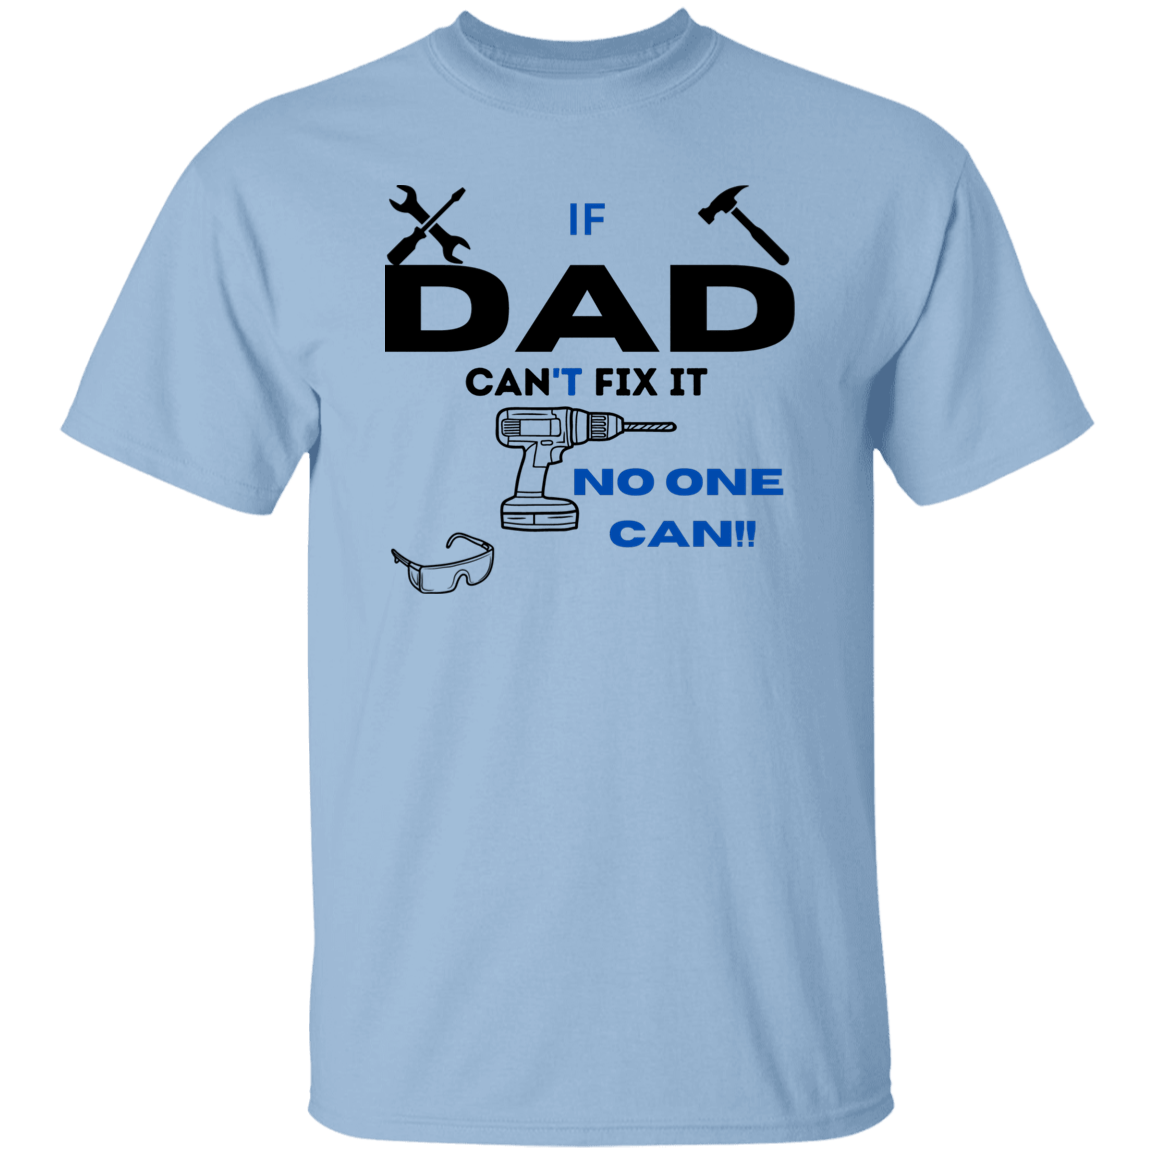 If Dad Can't Fix It...T-Shirt